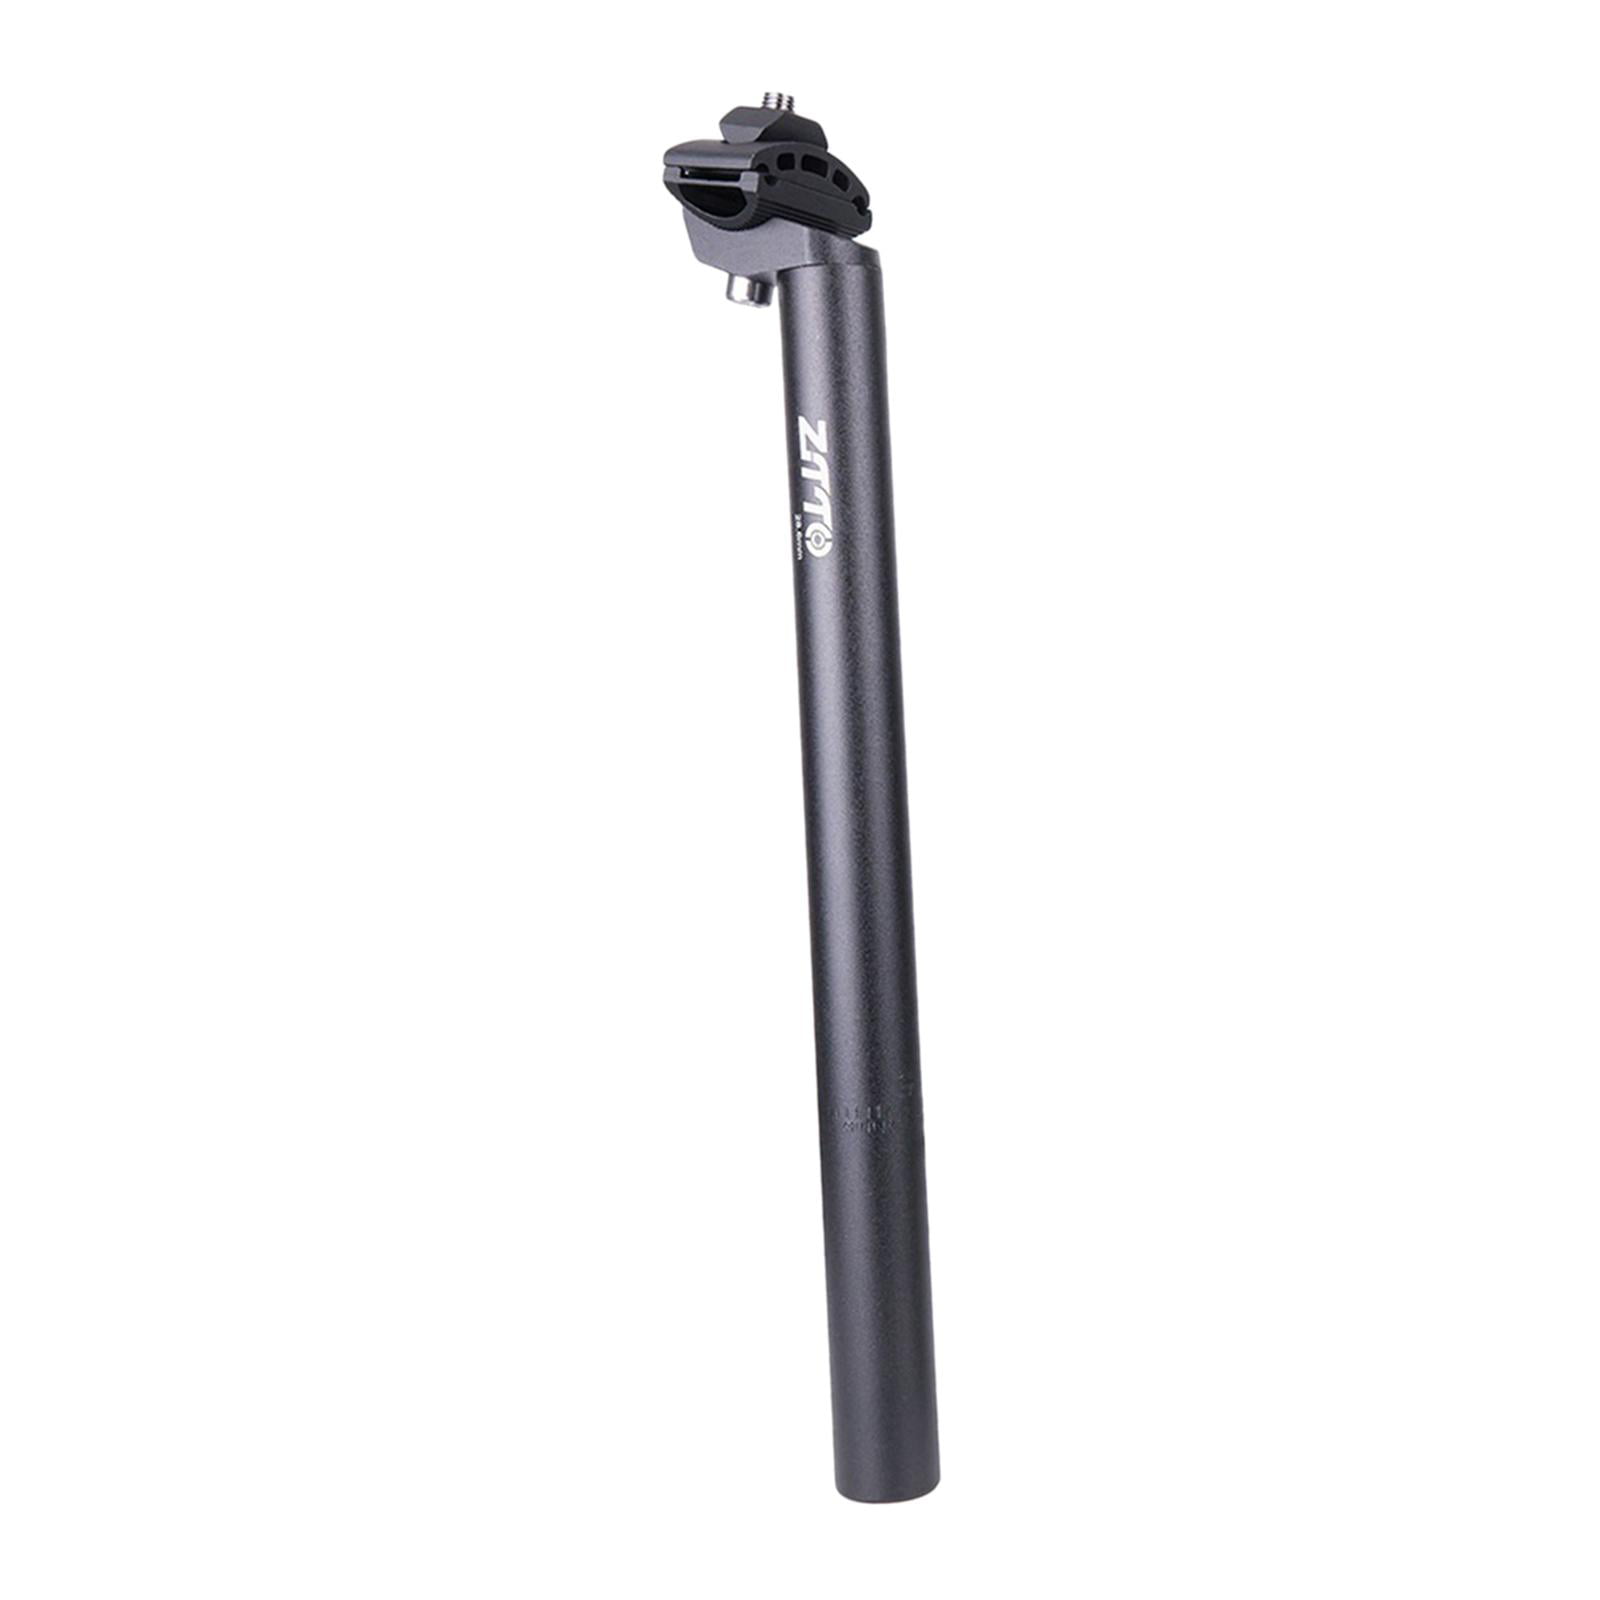 25.4 27.2 30.8 31.6mm Cycling Accessories Bikes Seat Post  Seat Tube Seatpost